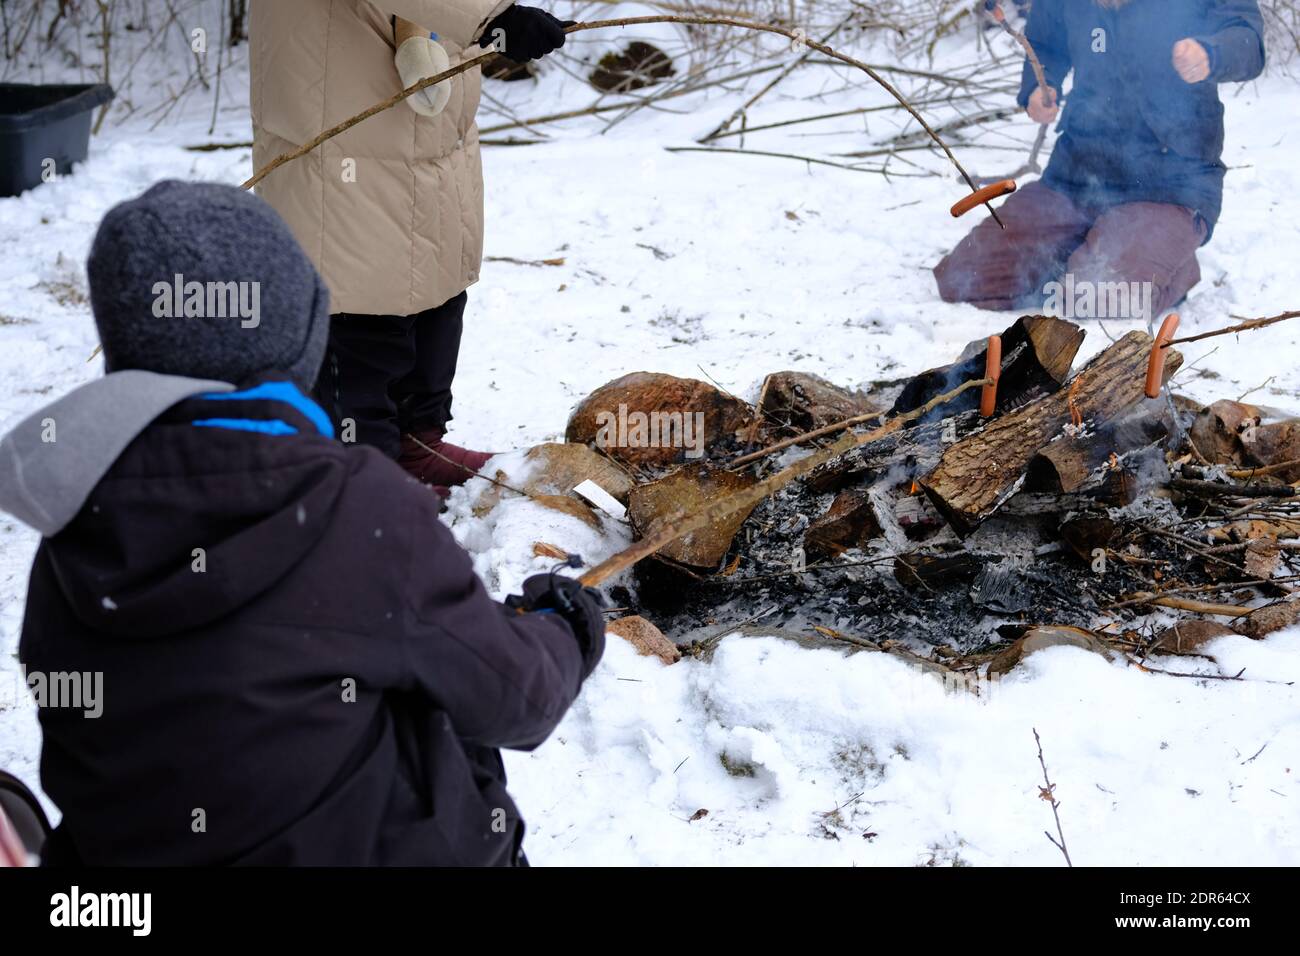 People roasting hot dogs over an open fire outdoors in the snow in winter in Ottawa, Ontario, Canada. Stock Photo